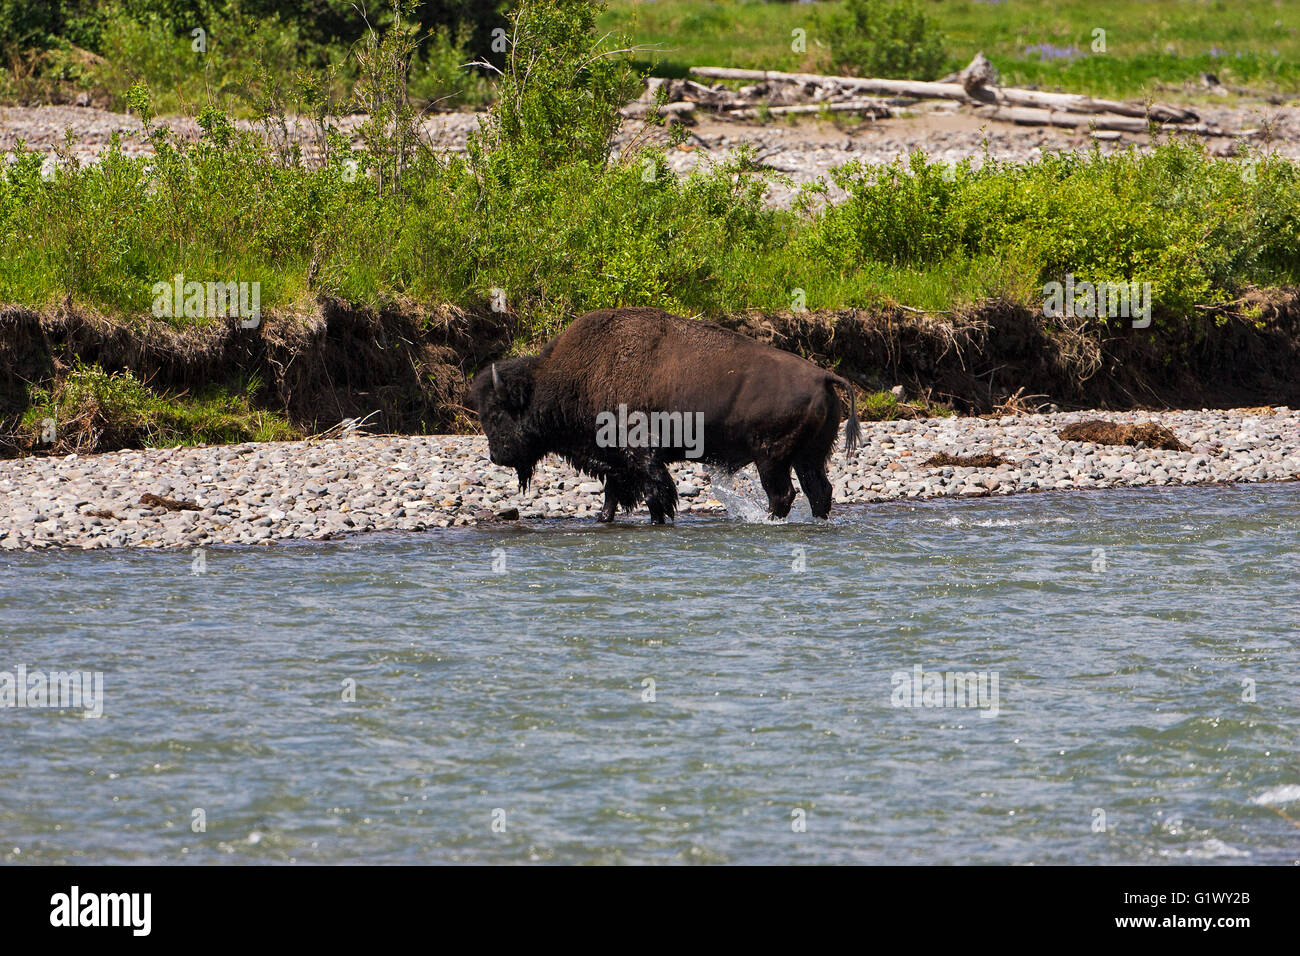 American bison Bison bison bull crossing the Lamar River Lamar Valley Yellowstone National Park Wyoming USA June 2015 Stock Photo